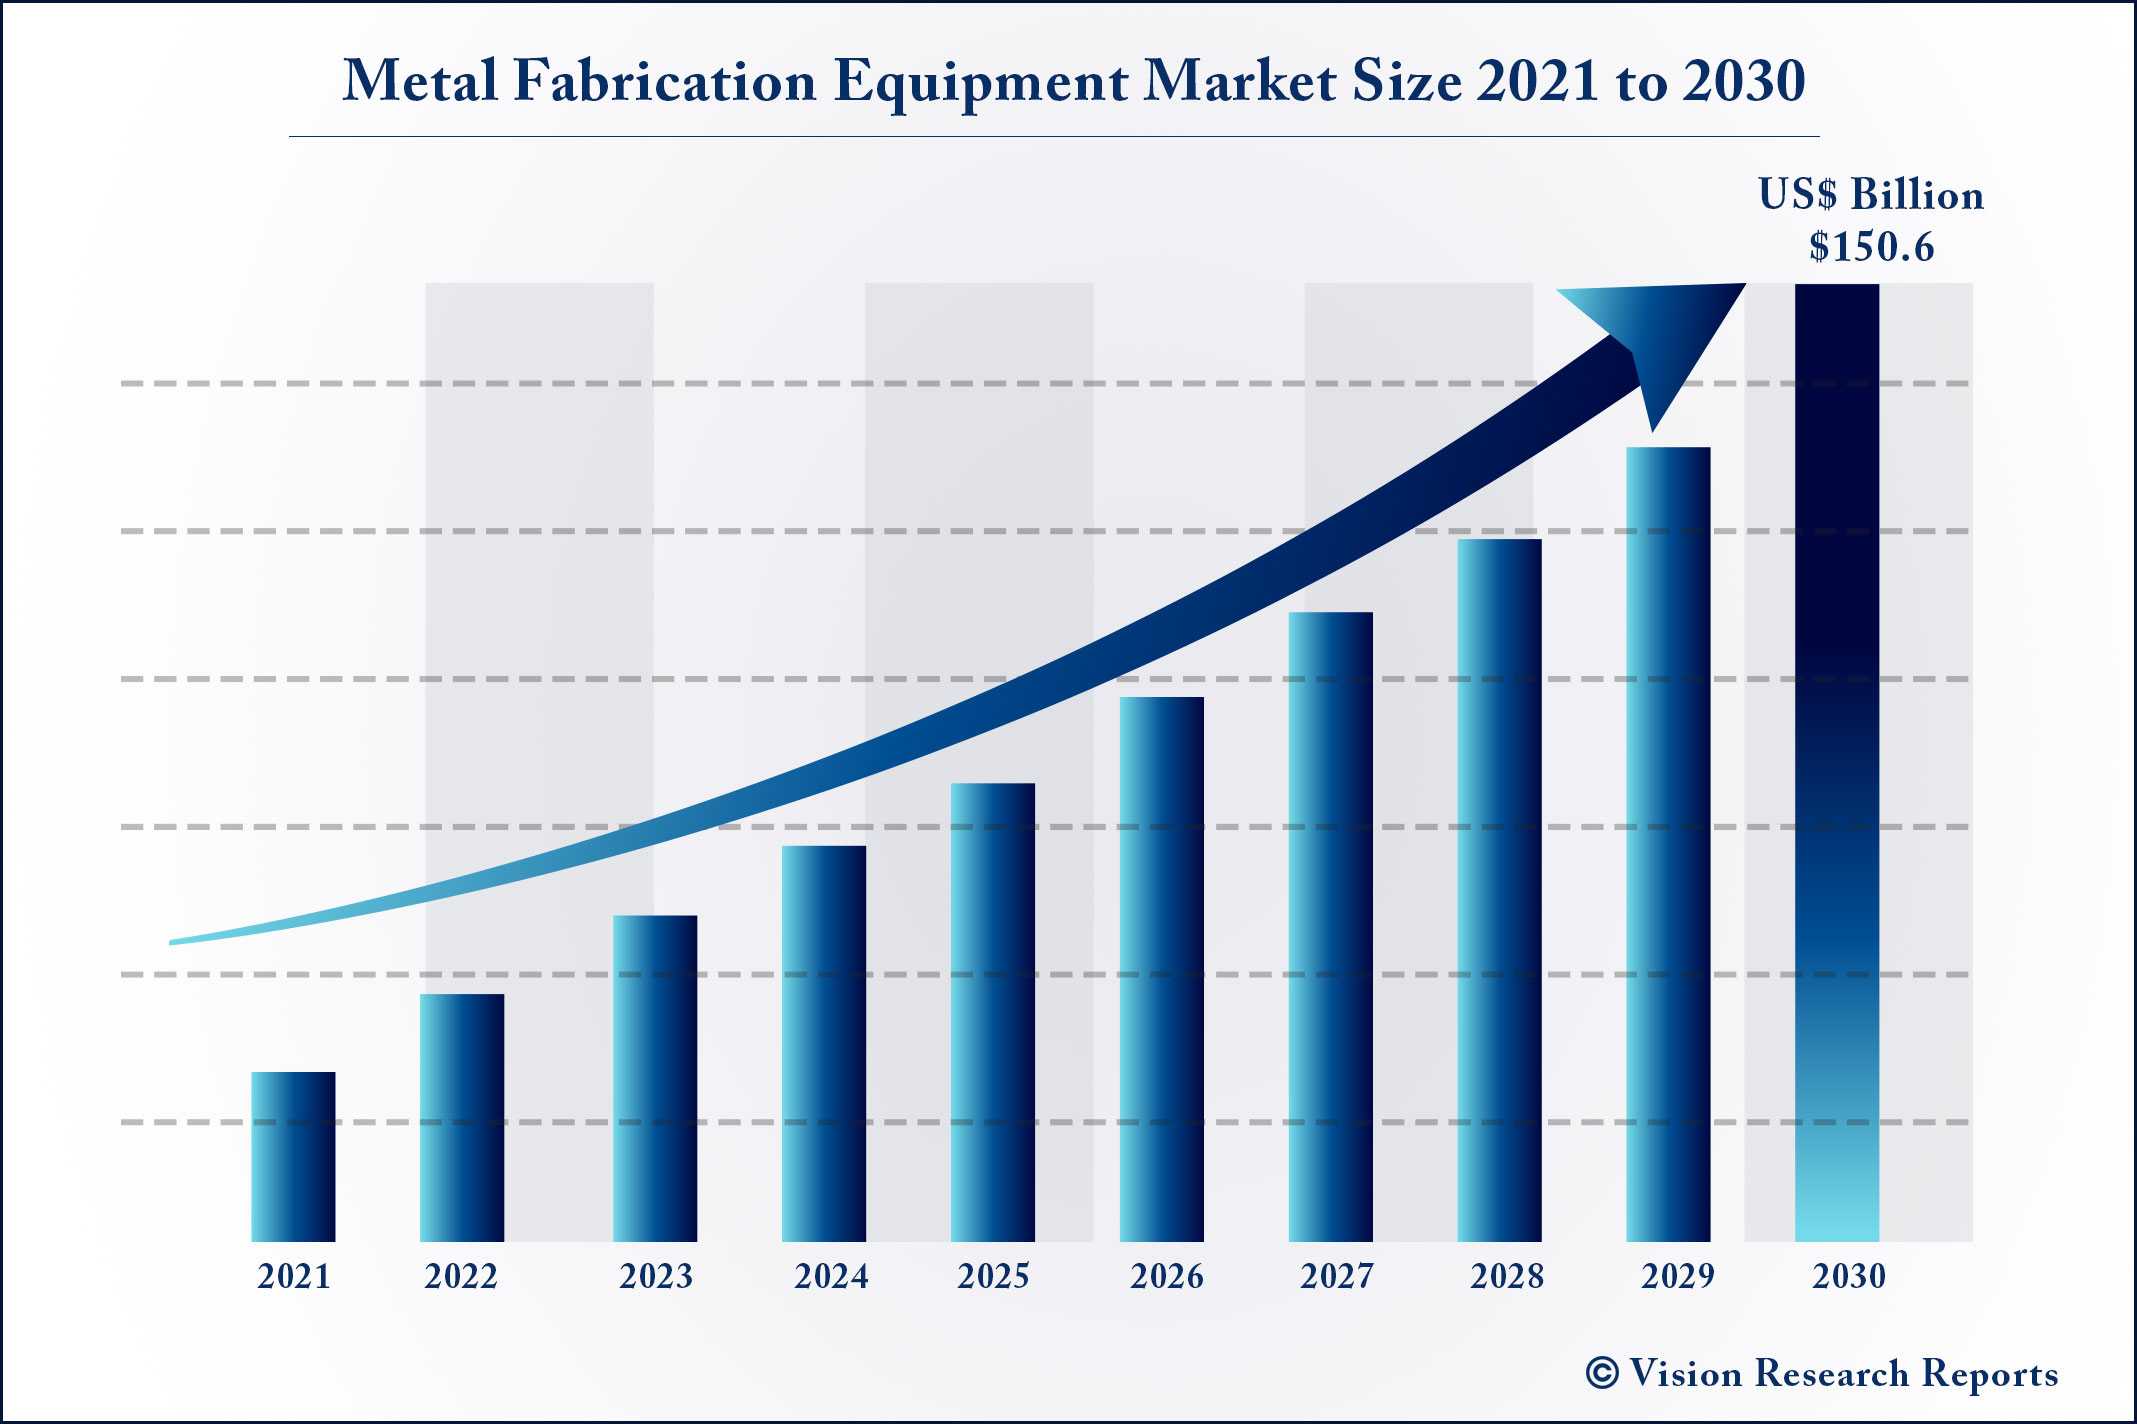 Metal Fabrication Equipment Market Size 2021 to 2030